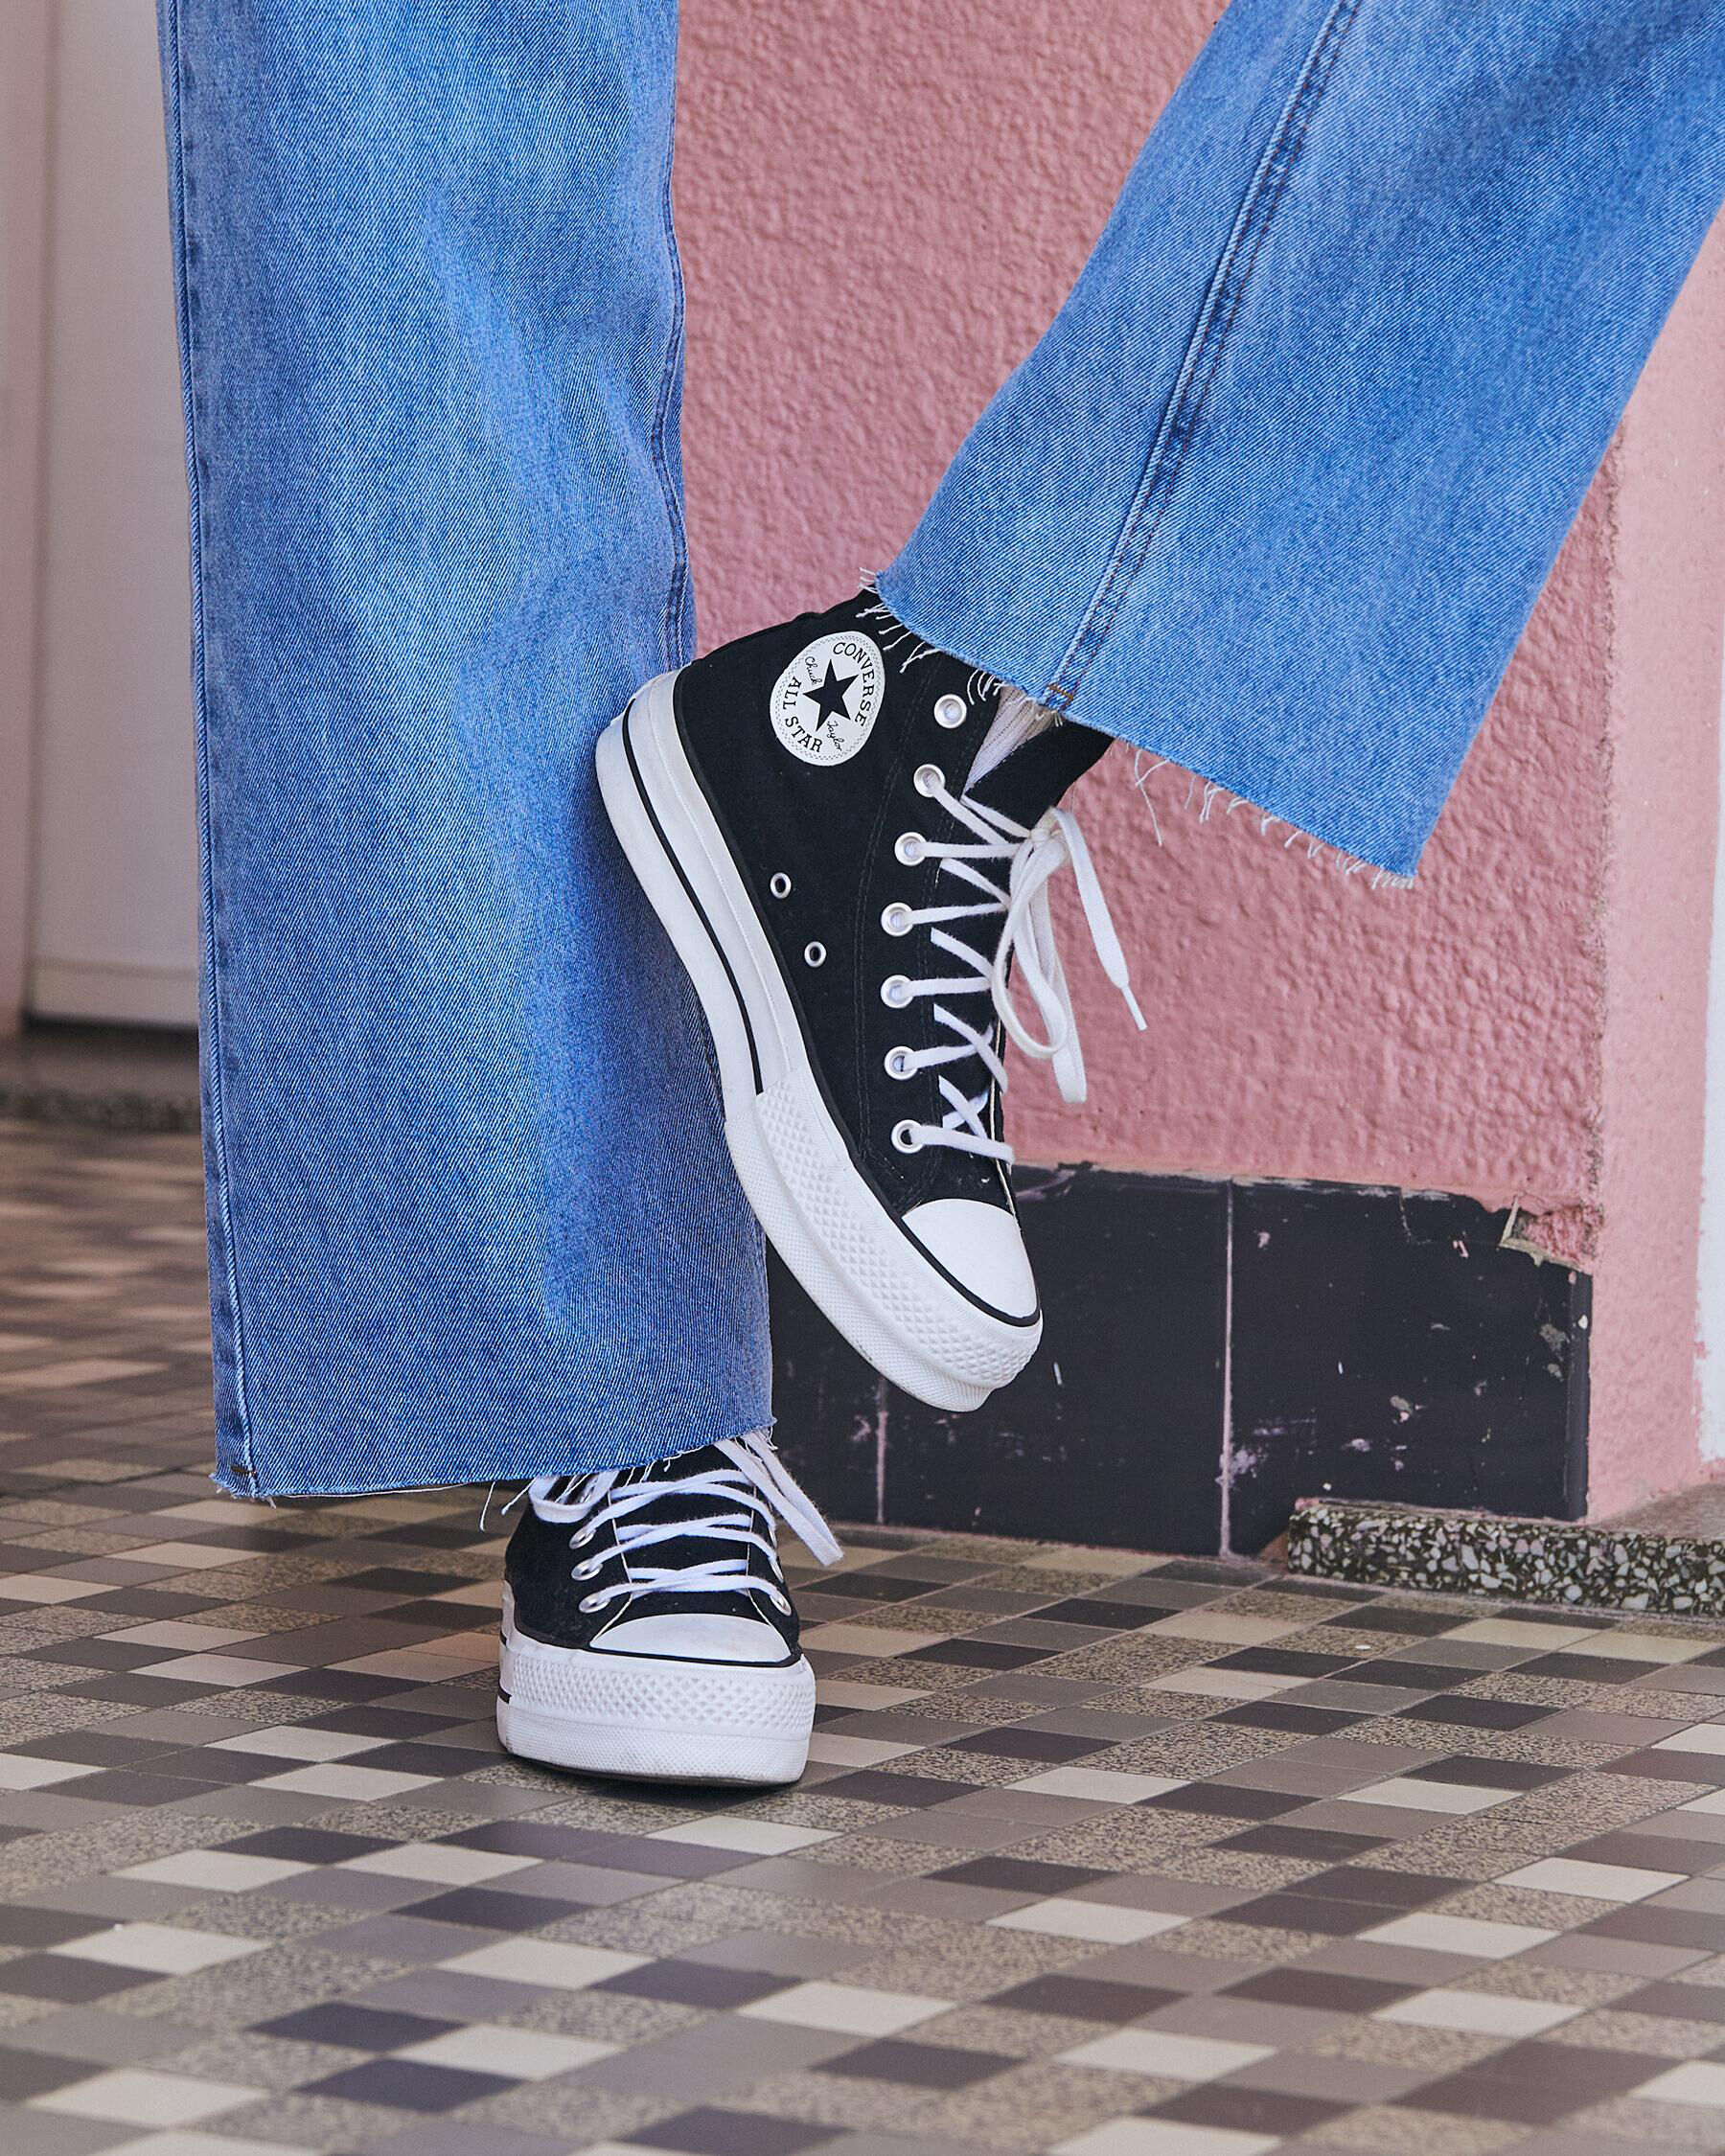 World Balance - Style built for the streets. The VENTURE high-cut sneakers  drops in our stores for P1,599. #Venture #WorldBalance #WorldAtYourFeet  Store Locations: http://bit.ly/1fm7uJ8 Shop via the WB Online Store thru PM